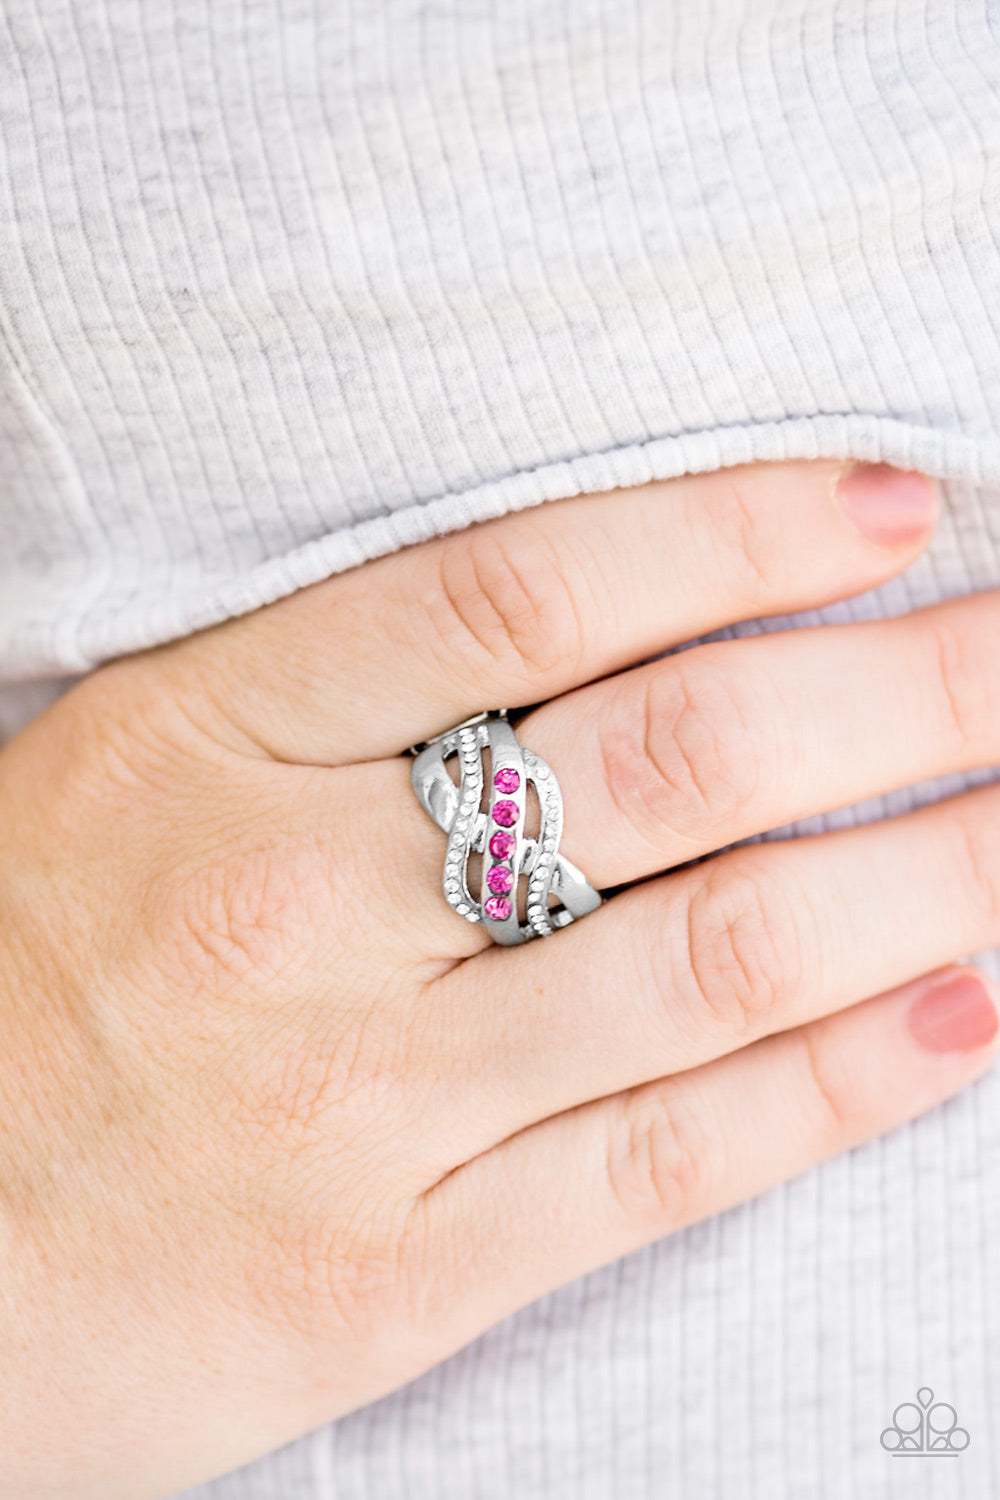 Flirting With Sparkle - Pink ring